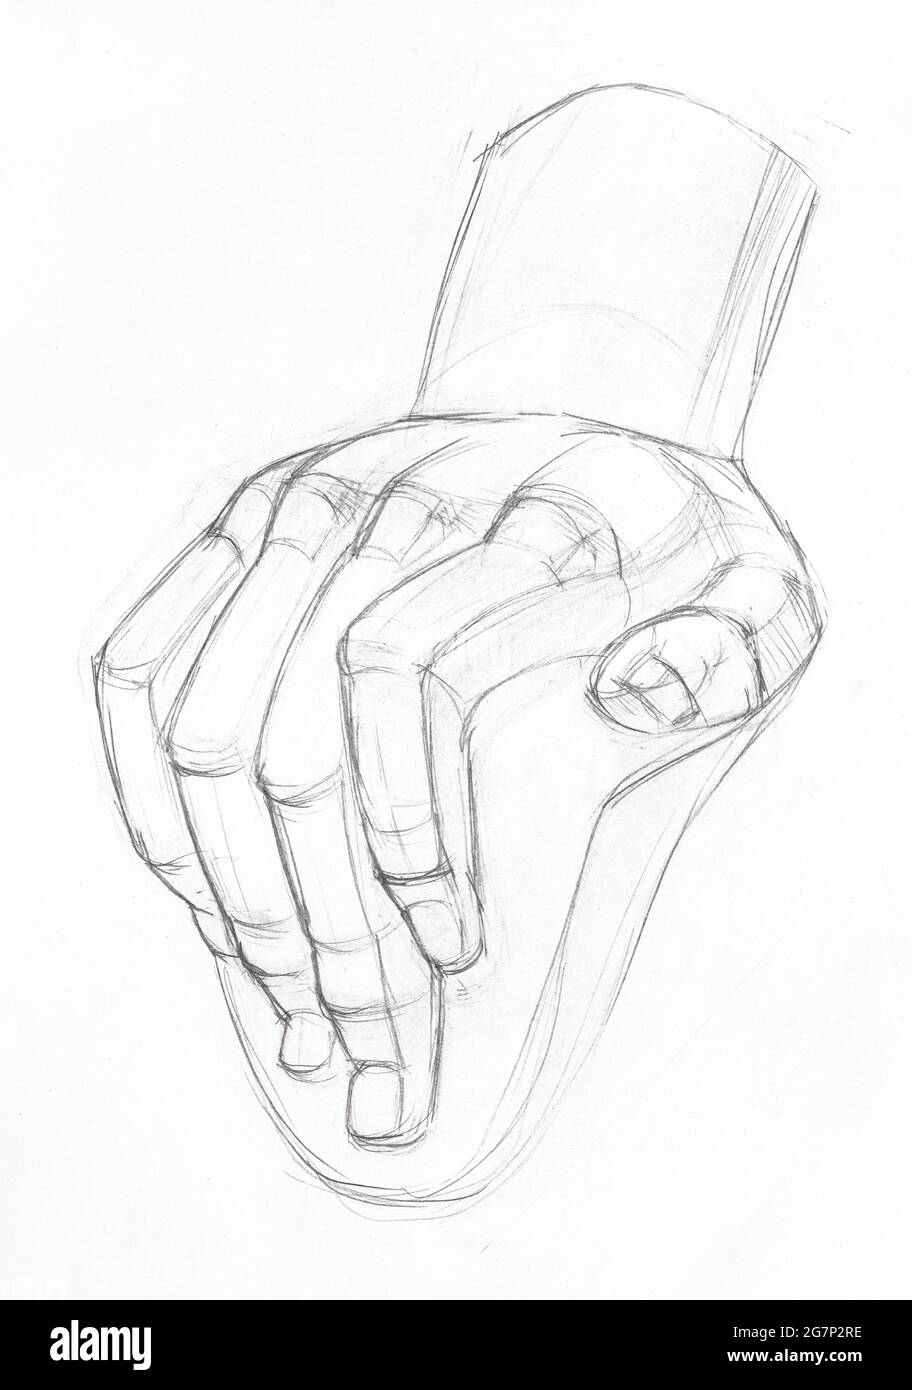 academic drawing - sketch of plaster cast of male hand hand-drawn by graphite pencil on white paper Stock Photo